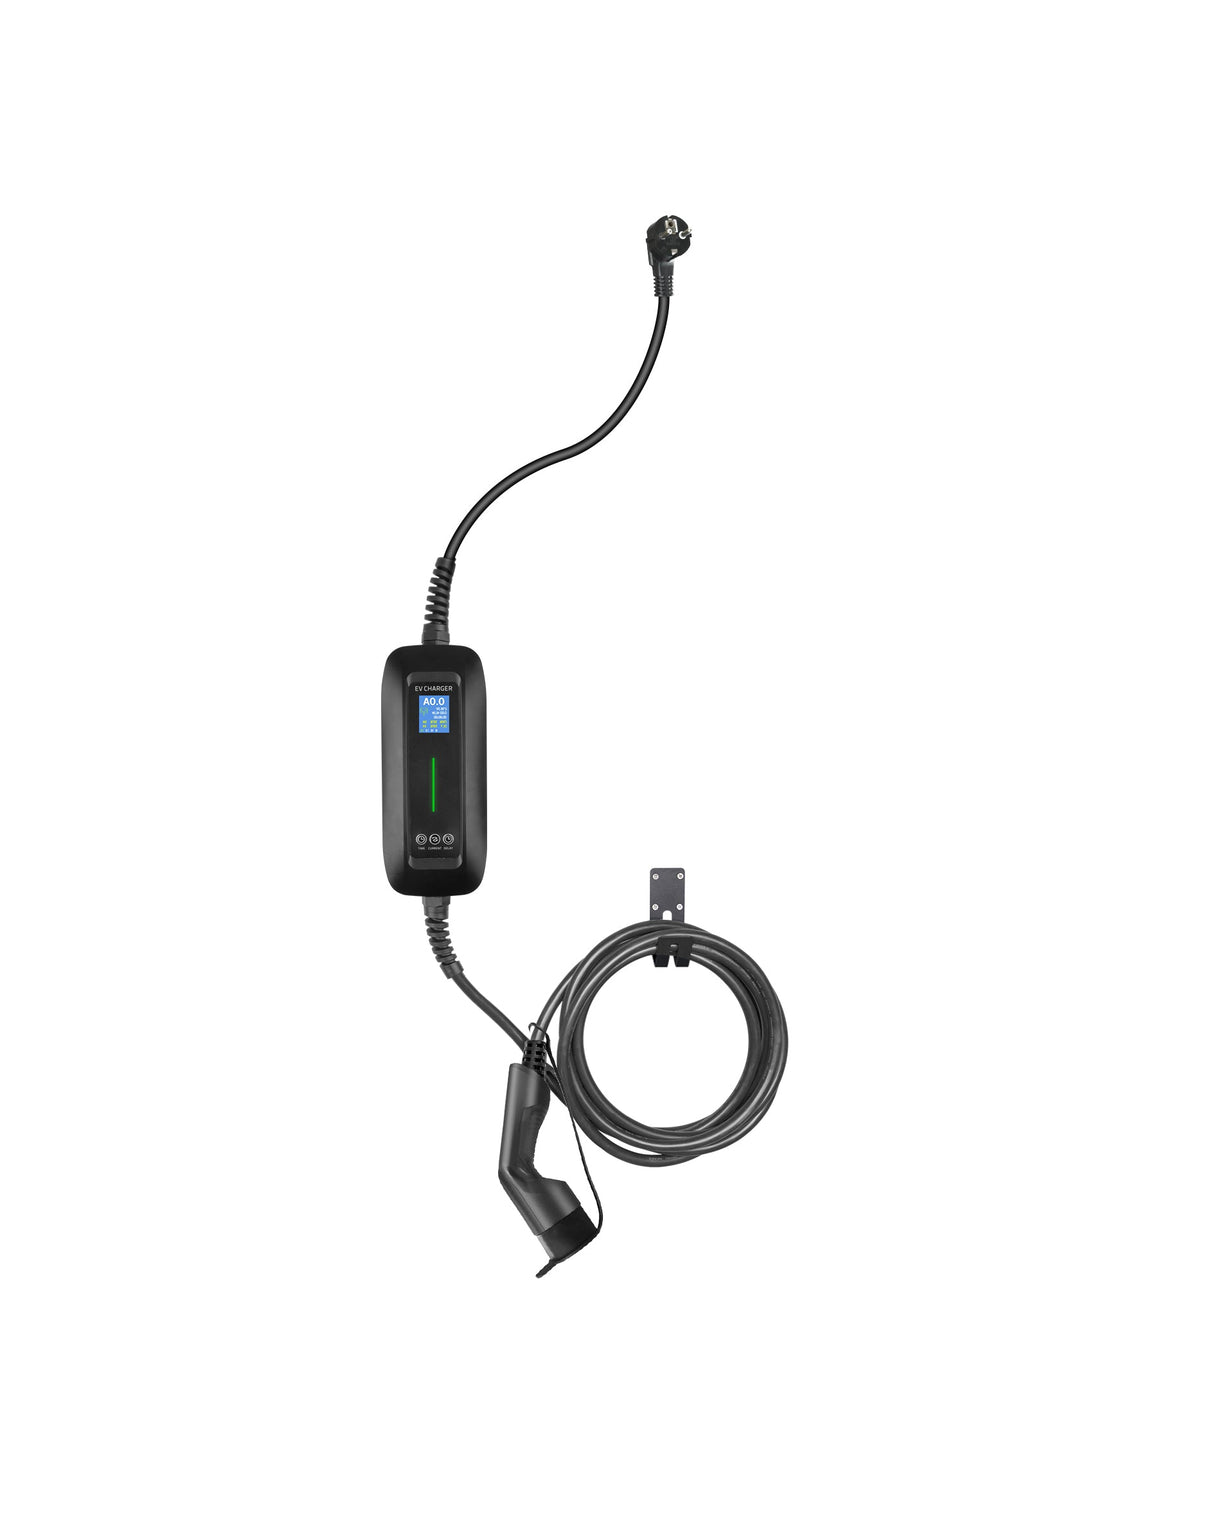 Mobile Charger Fisker Ocean - LCD Black Type 2 to Schuko - Delayed charging and Memory function